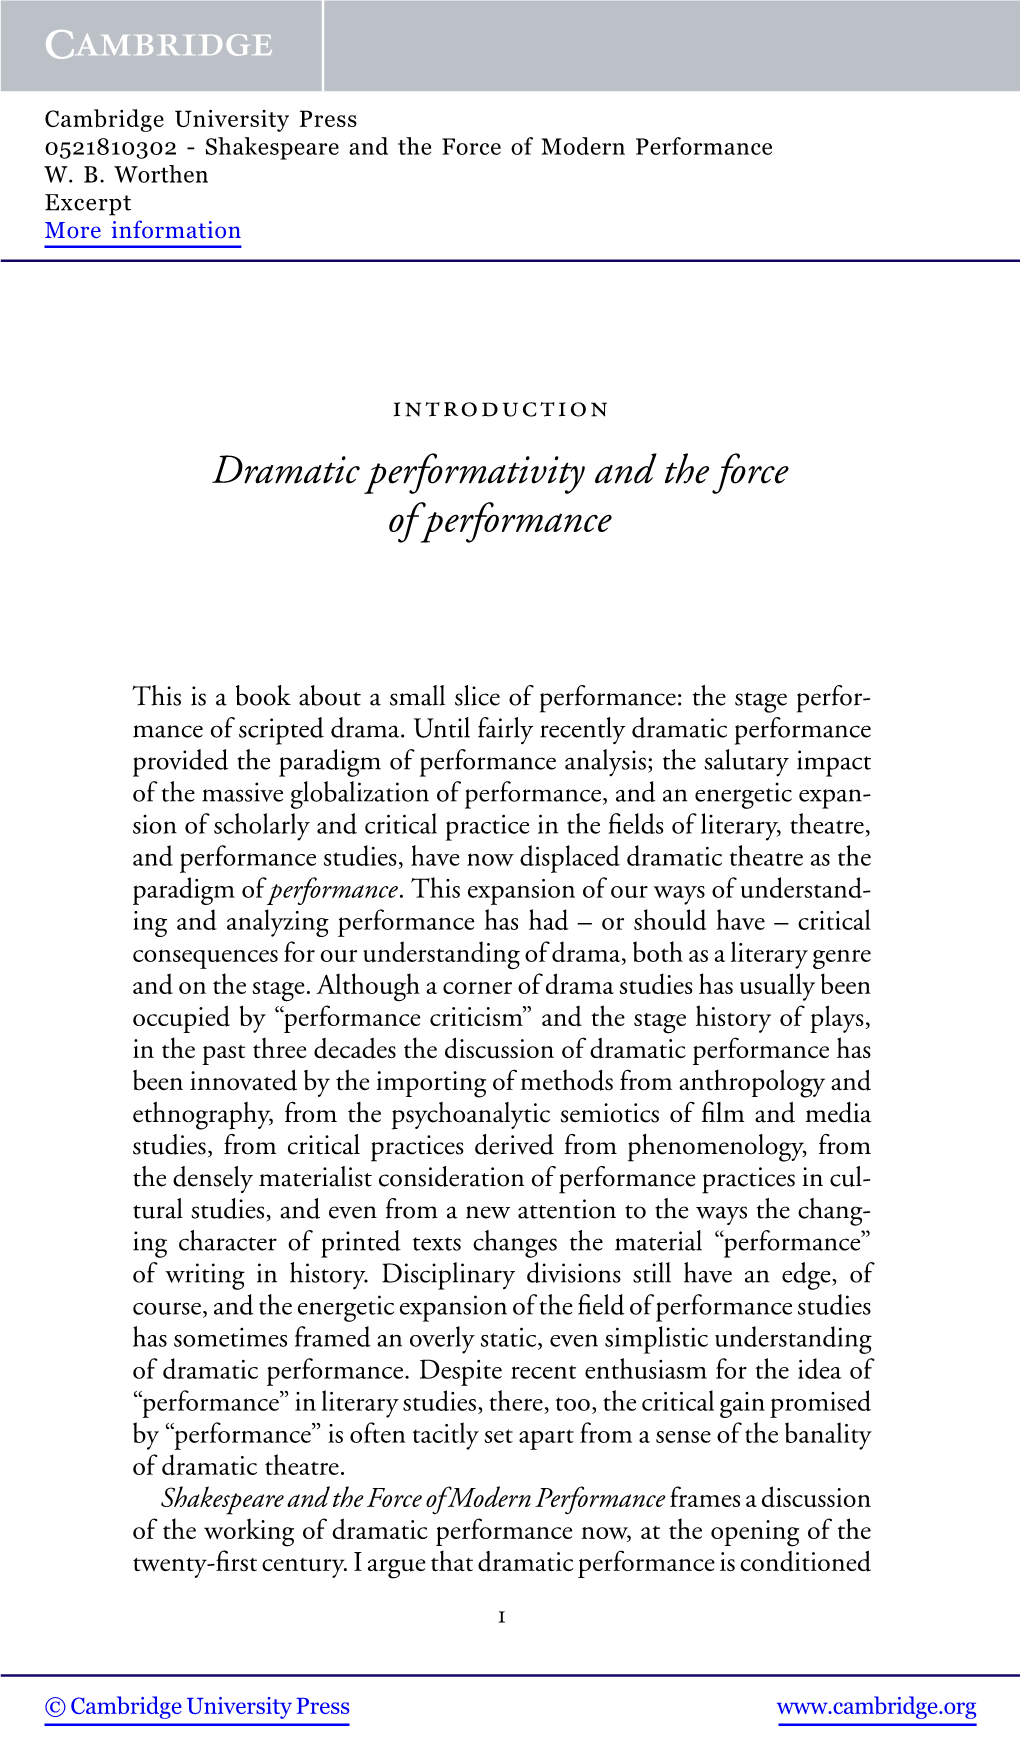 Dramatic Performativity and the Force of Performance